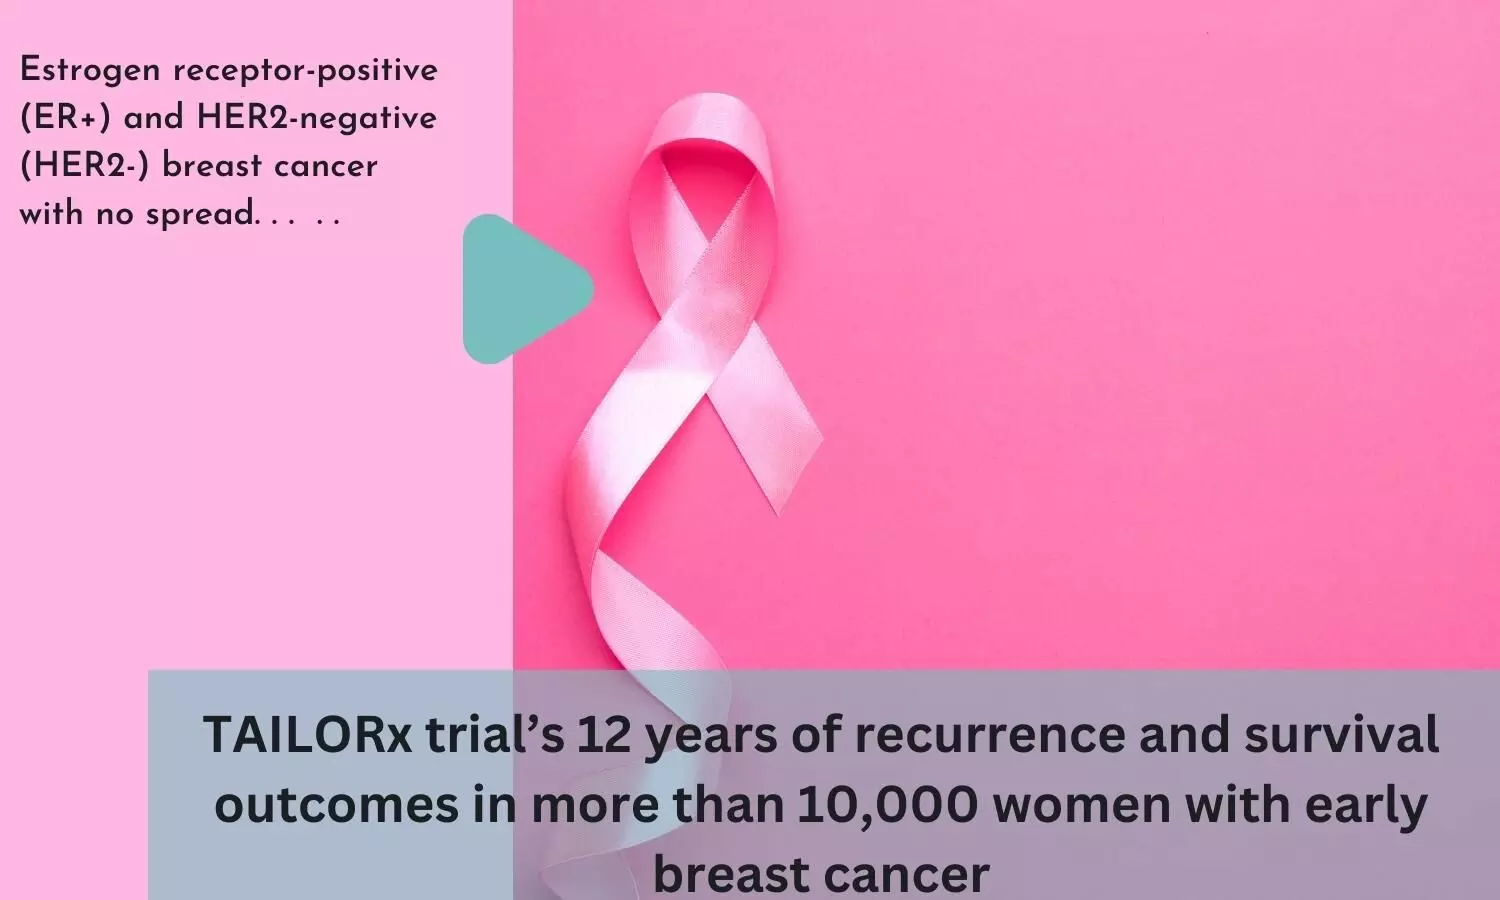 TAILORx trials 12 years of recurrence and survival outcomes in more than 10,000 women with early breast cancer